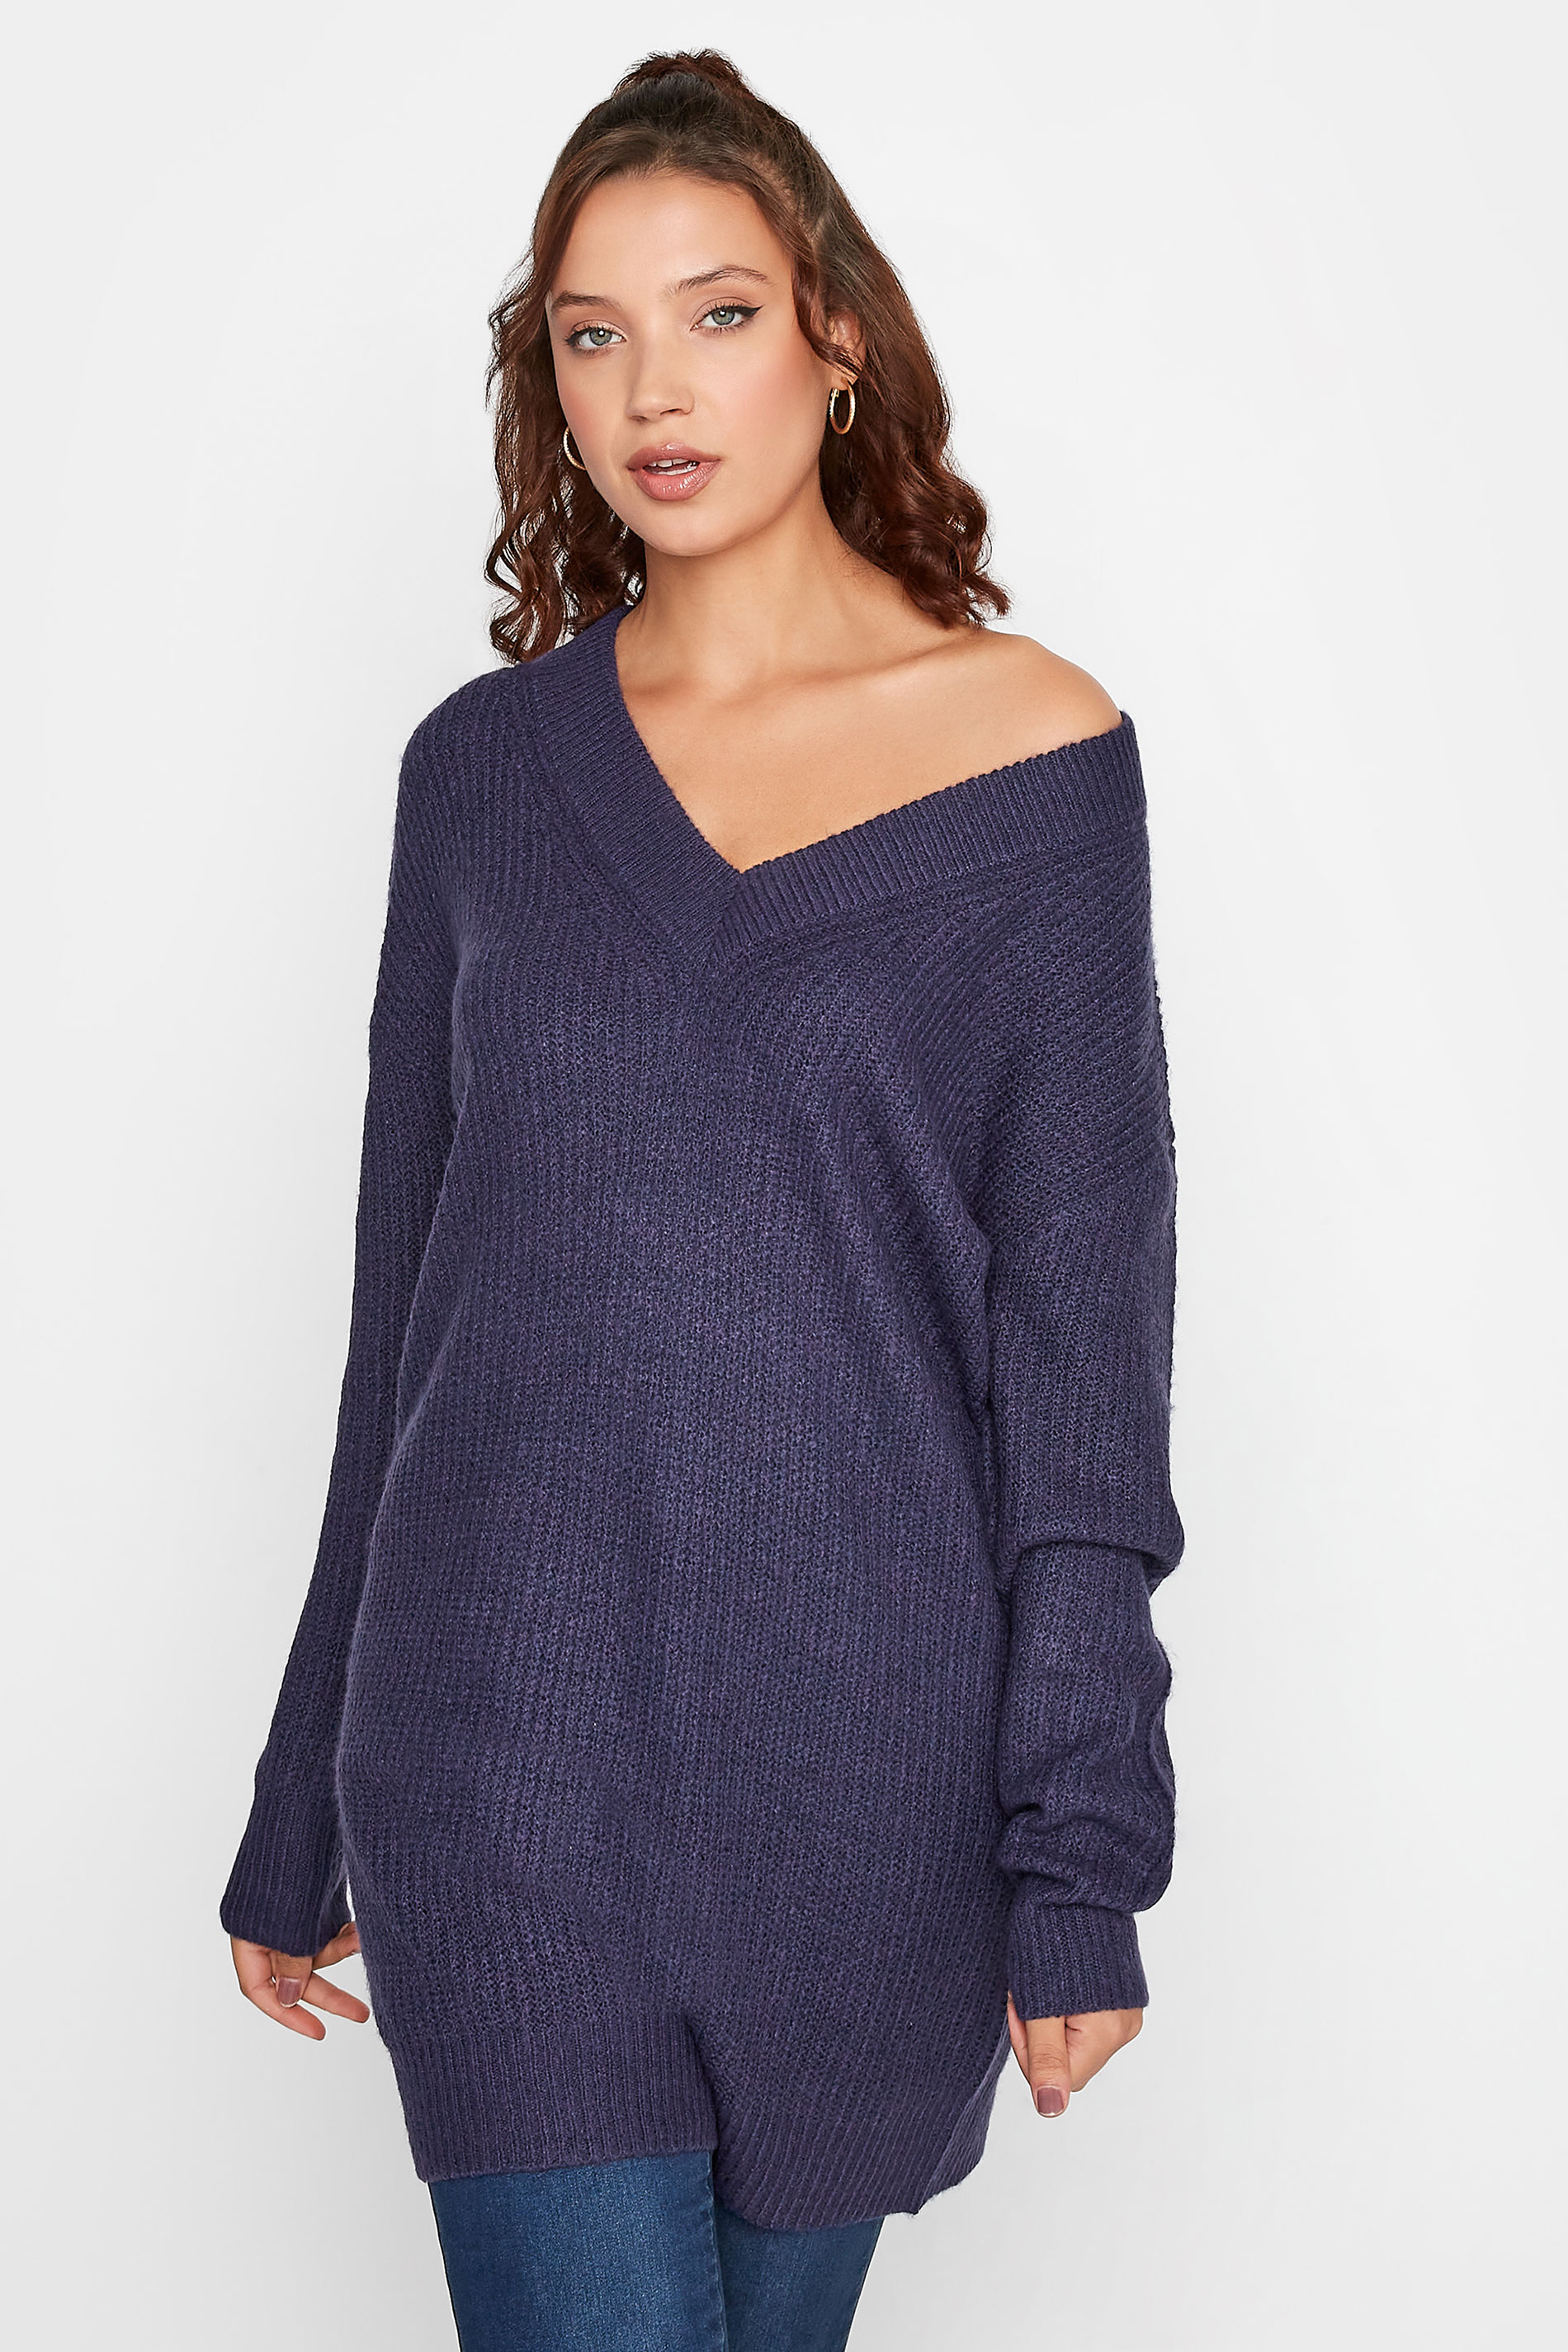 LTS Tall Women's Navy Blue V-Neck Knitted Tunic Top | Long Tall Sally 1